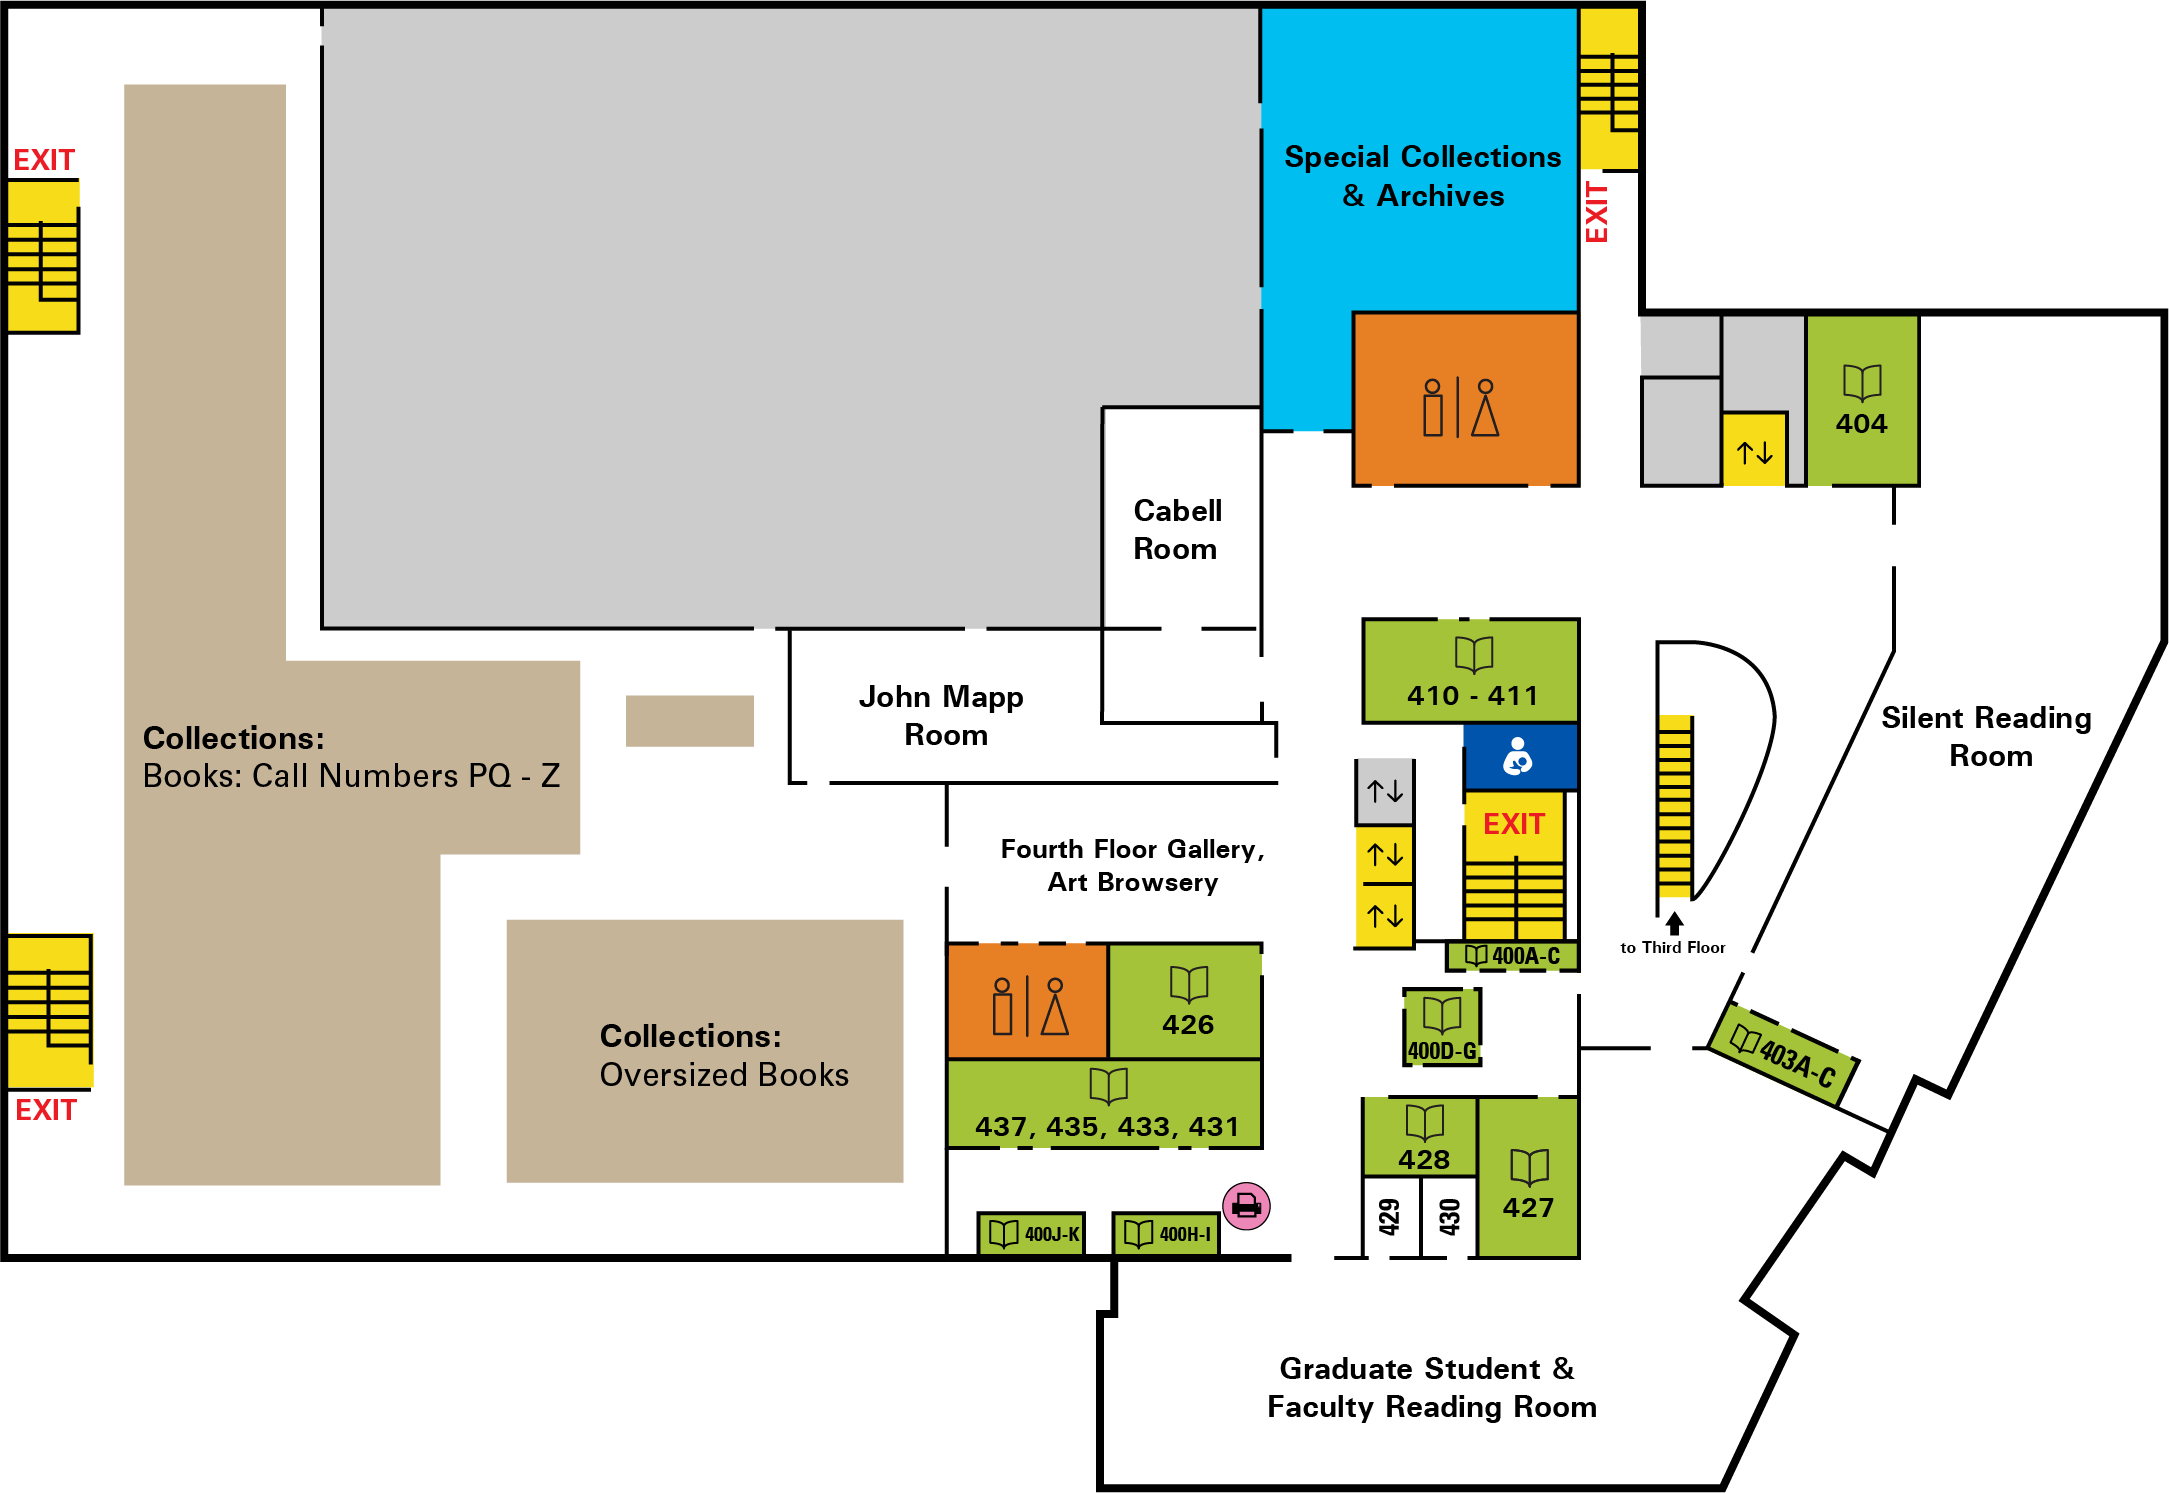 Floor map of the fourth floor of Cabell Library